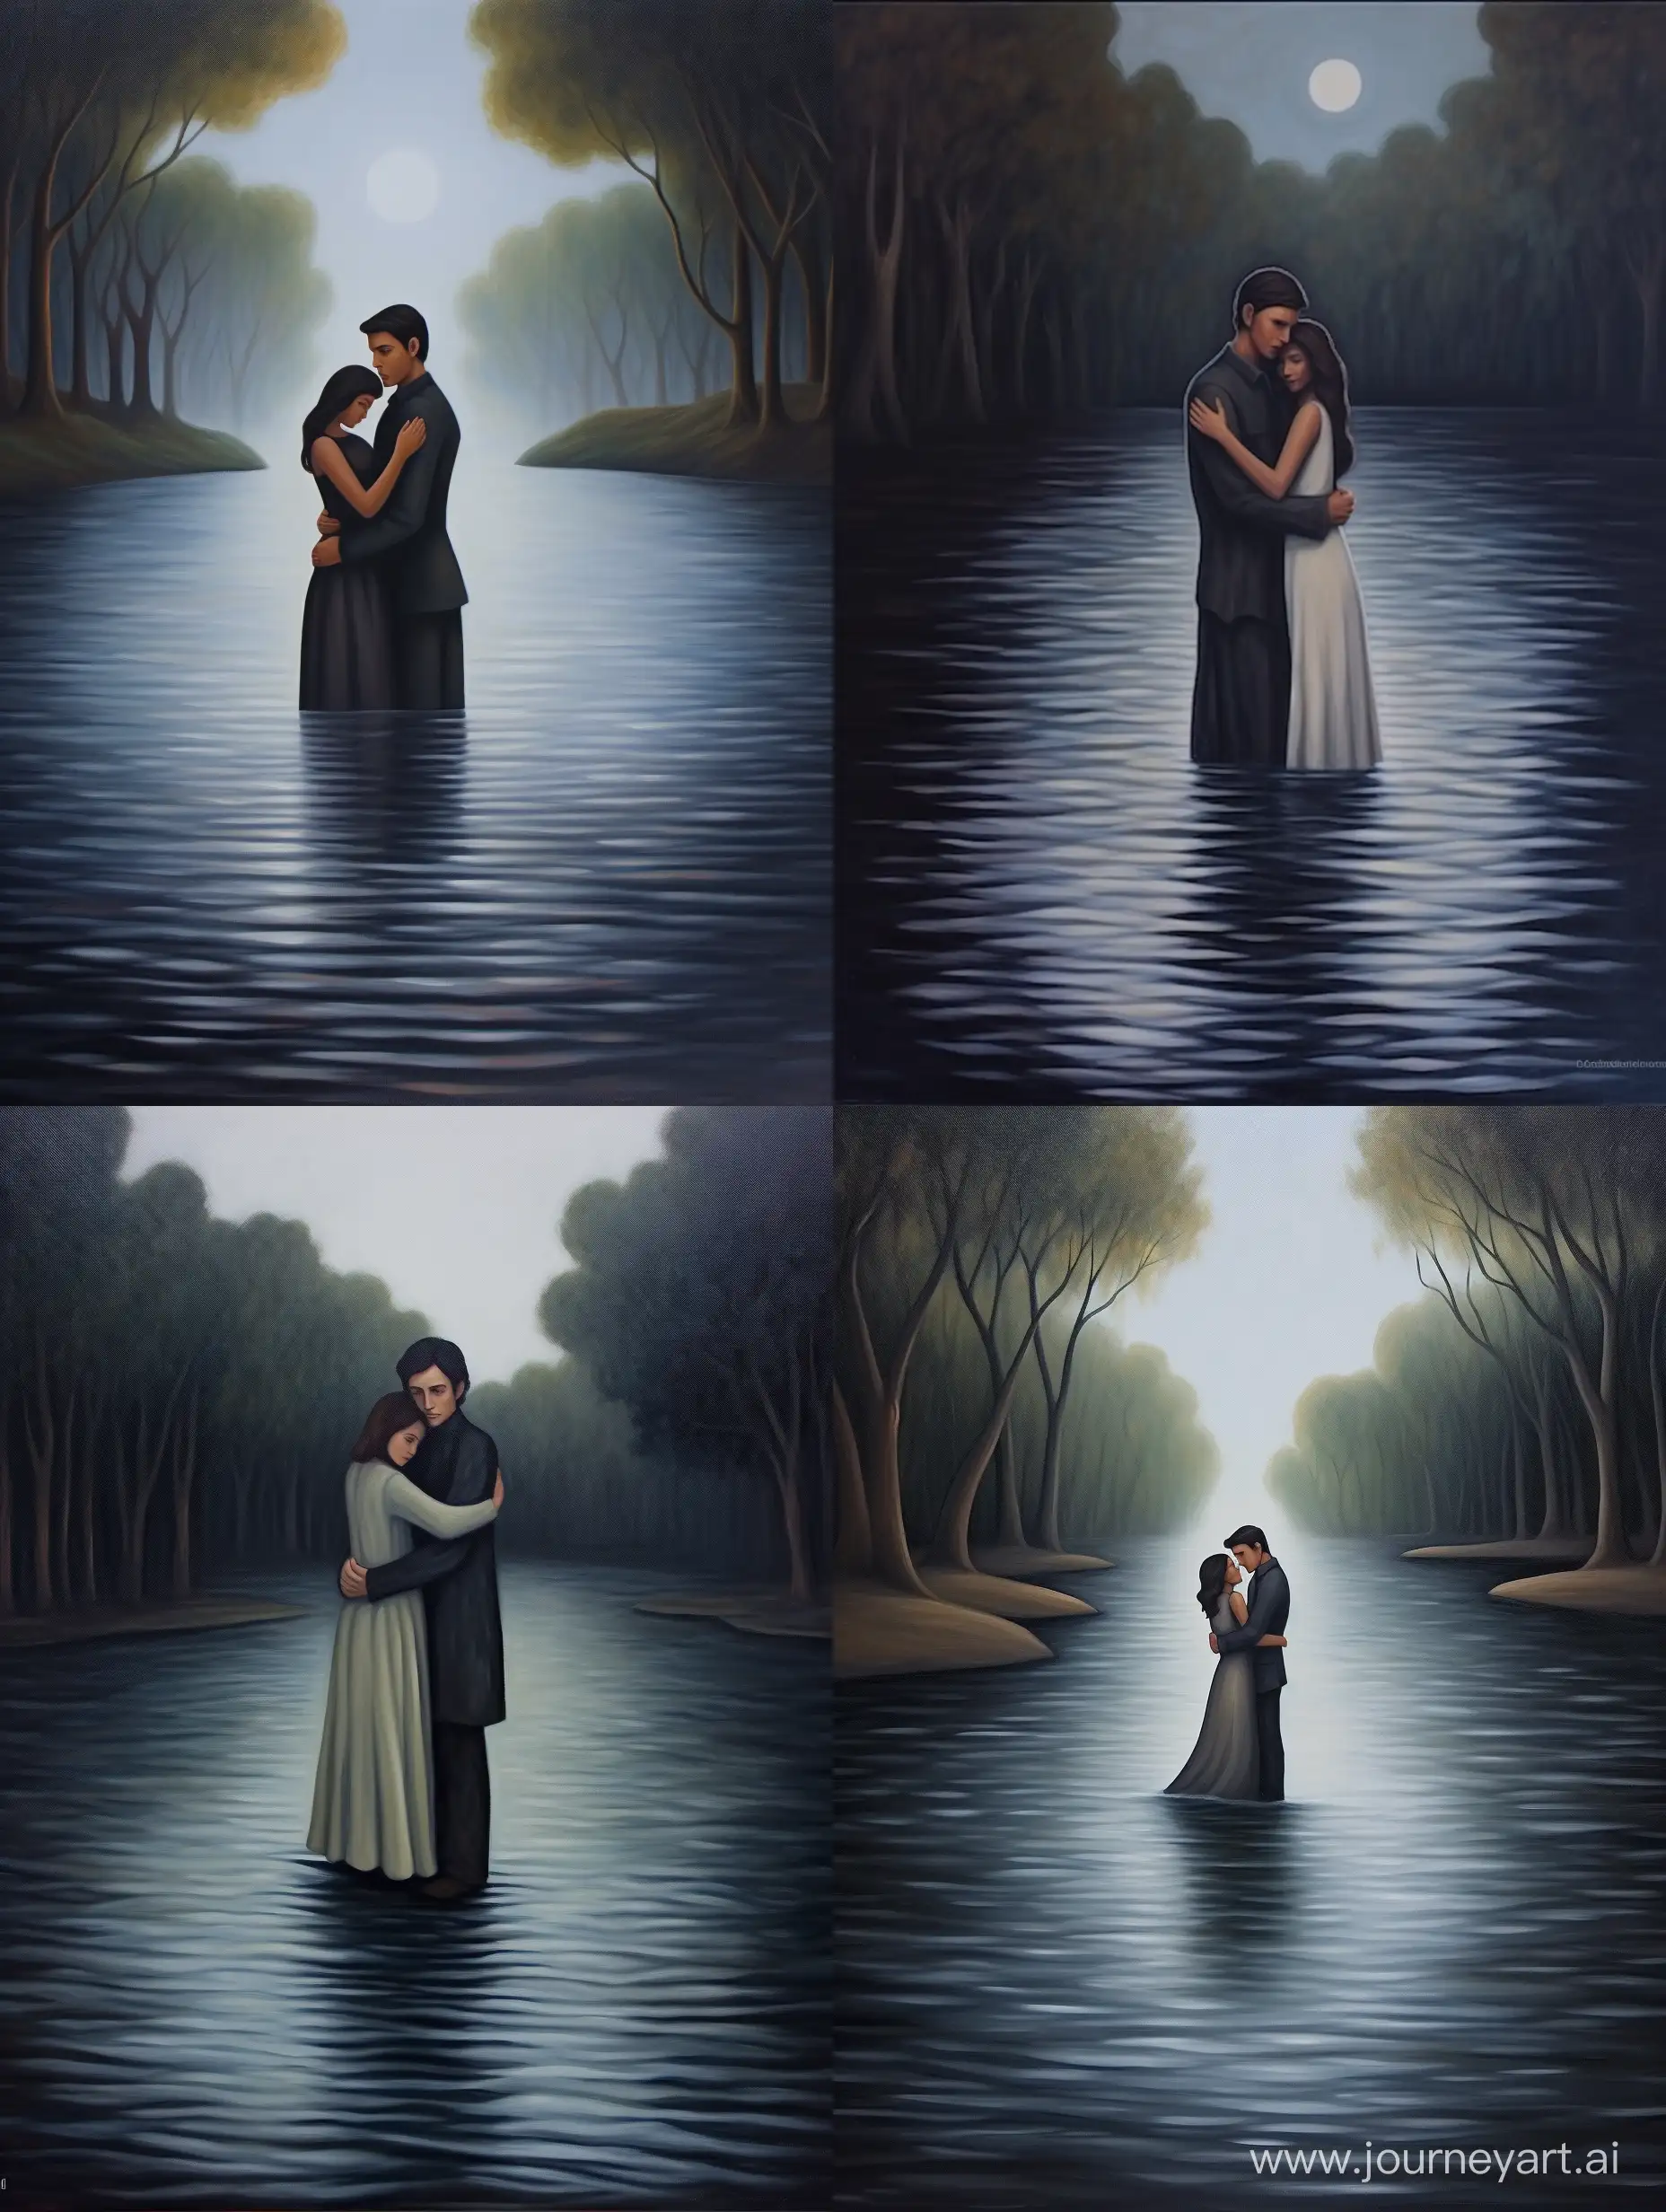 An oil painting depicting a woman and a man hugging in the water at night, chest out of the water, lower body in the water